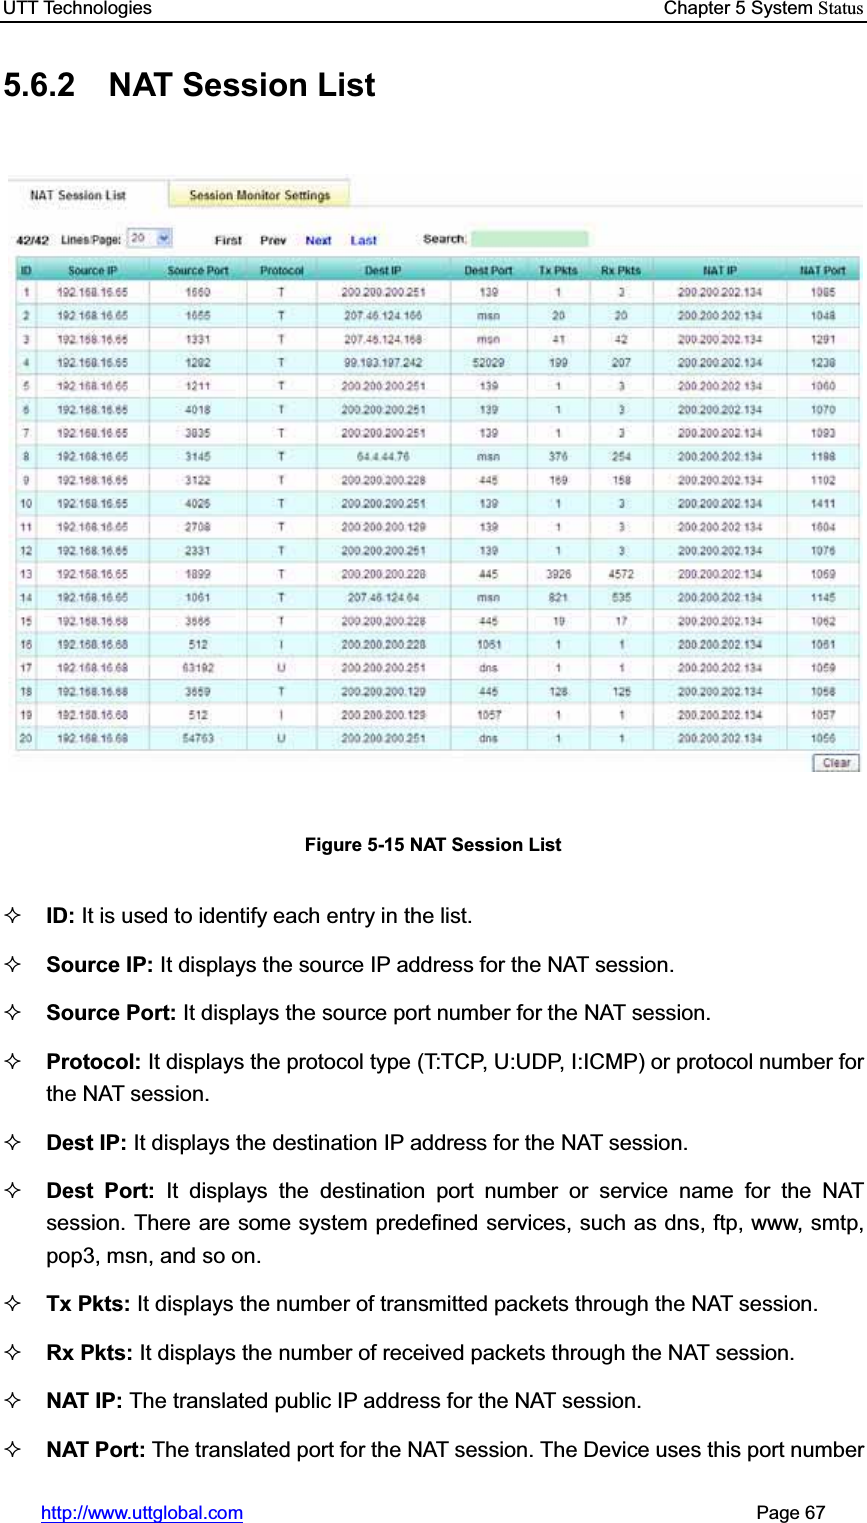 UTT Technologies    Chapter 5 System Statushttp://www.uttglobal.com                                                       Page 67 5.6.2  NAT Session List Figure 5-15 NAT Session List ID: It is used to identify each entry in the list.Source IP: It displays the source IP address for the NAT session.Source Port: It displays the source port number for the NAT session. Protocol: It displays the protocol type (T:TCP, U:UDP, I:ICMP) or protocol number for the NAT session.Dest IP: It displays the destination IP address for the NAT session. Dest Port: It displays the destination port number or service name for the NAT session. There are some system predefined services, such as dns, ftp, www, smtp, pop3, msn, and so on. Tx Pkts: It displays the number of transmitted packets through the NAT session. Rx Pkts: It displays the number of received packets through the NAT session.NAT IP: The translated public IP address for the NAT session.   NAT Port: The translated port for the NAT session. The Device uses this port number 